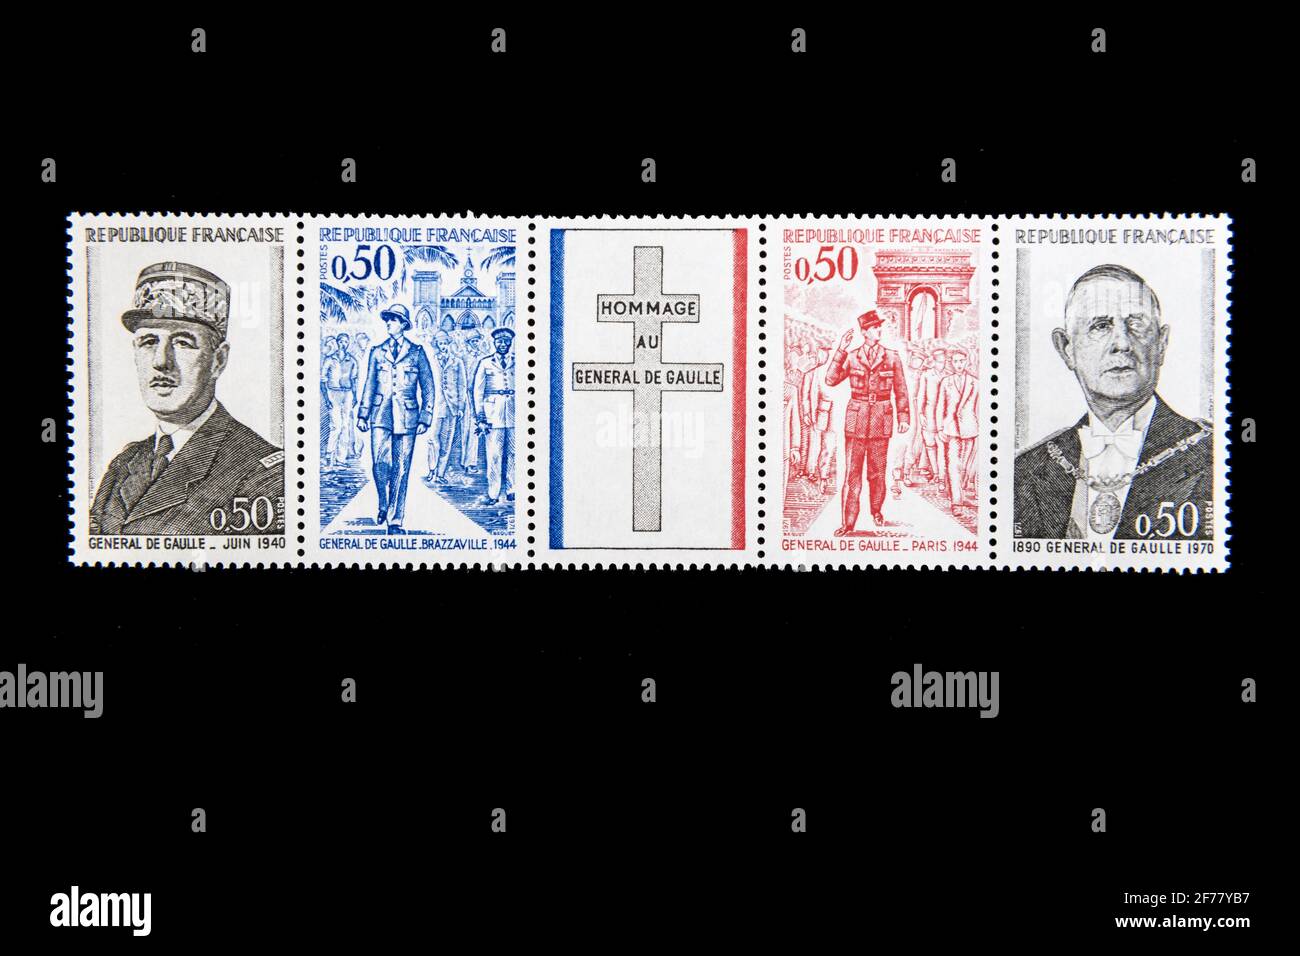 France, Paris, stamps, tribute to General de Gaulle Stock Photo